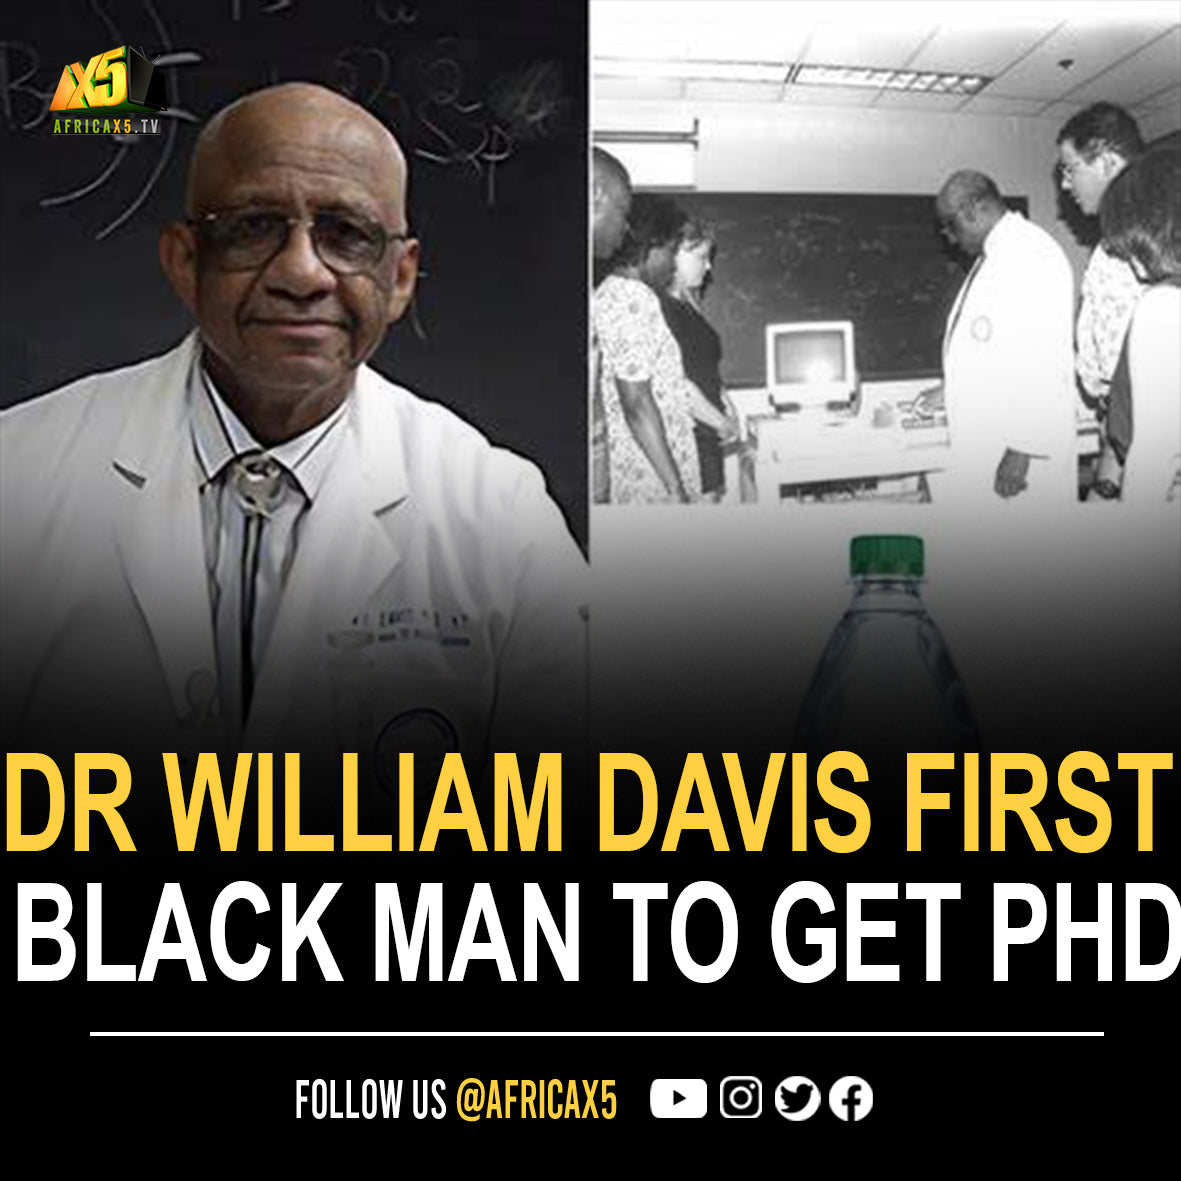 Dr. William Conan Davis was the first black man to recieve a PhD from the University of Idaho in 1965